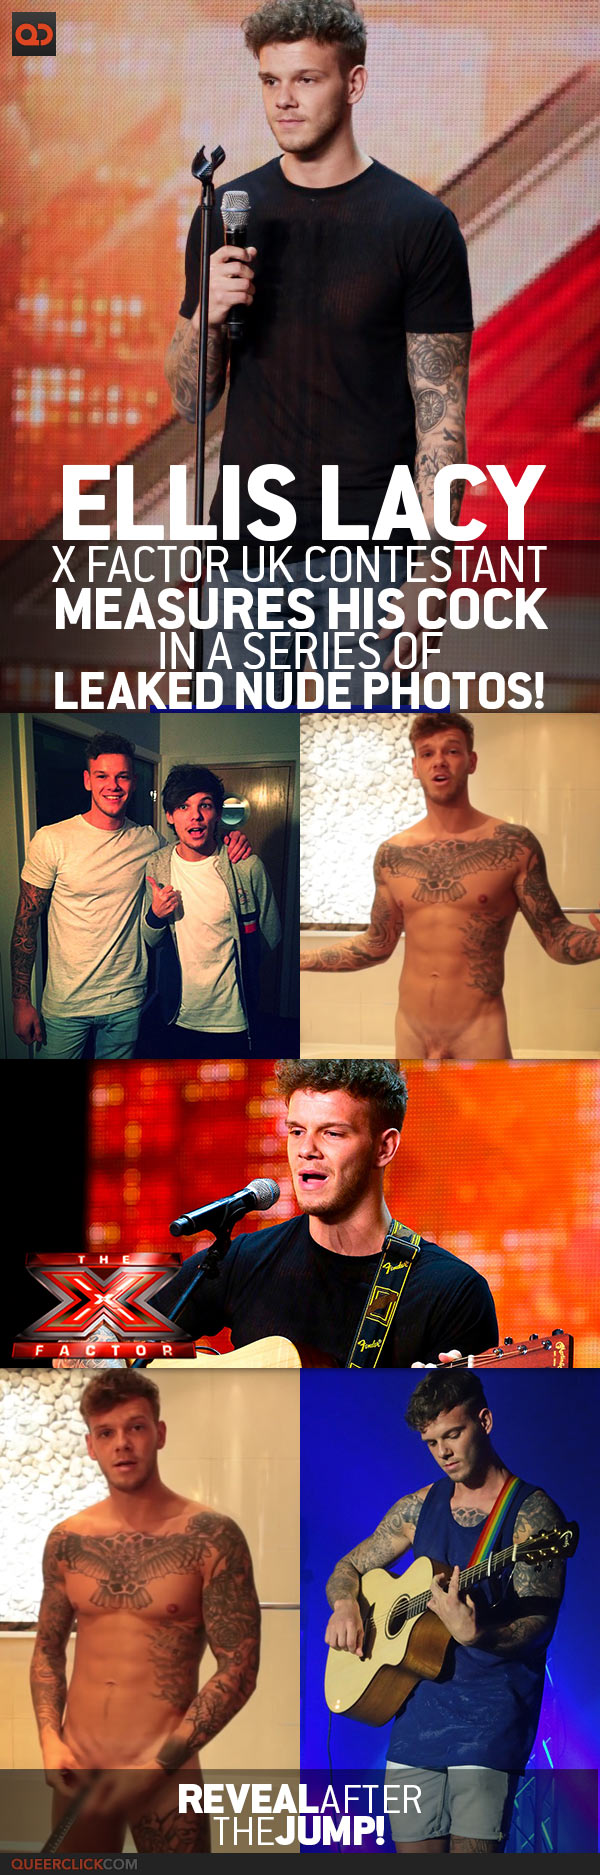 Ellis Lacy, X Factor UK Contestant Measures His Cock In A Series Of Leaked Nude Photos!